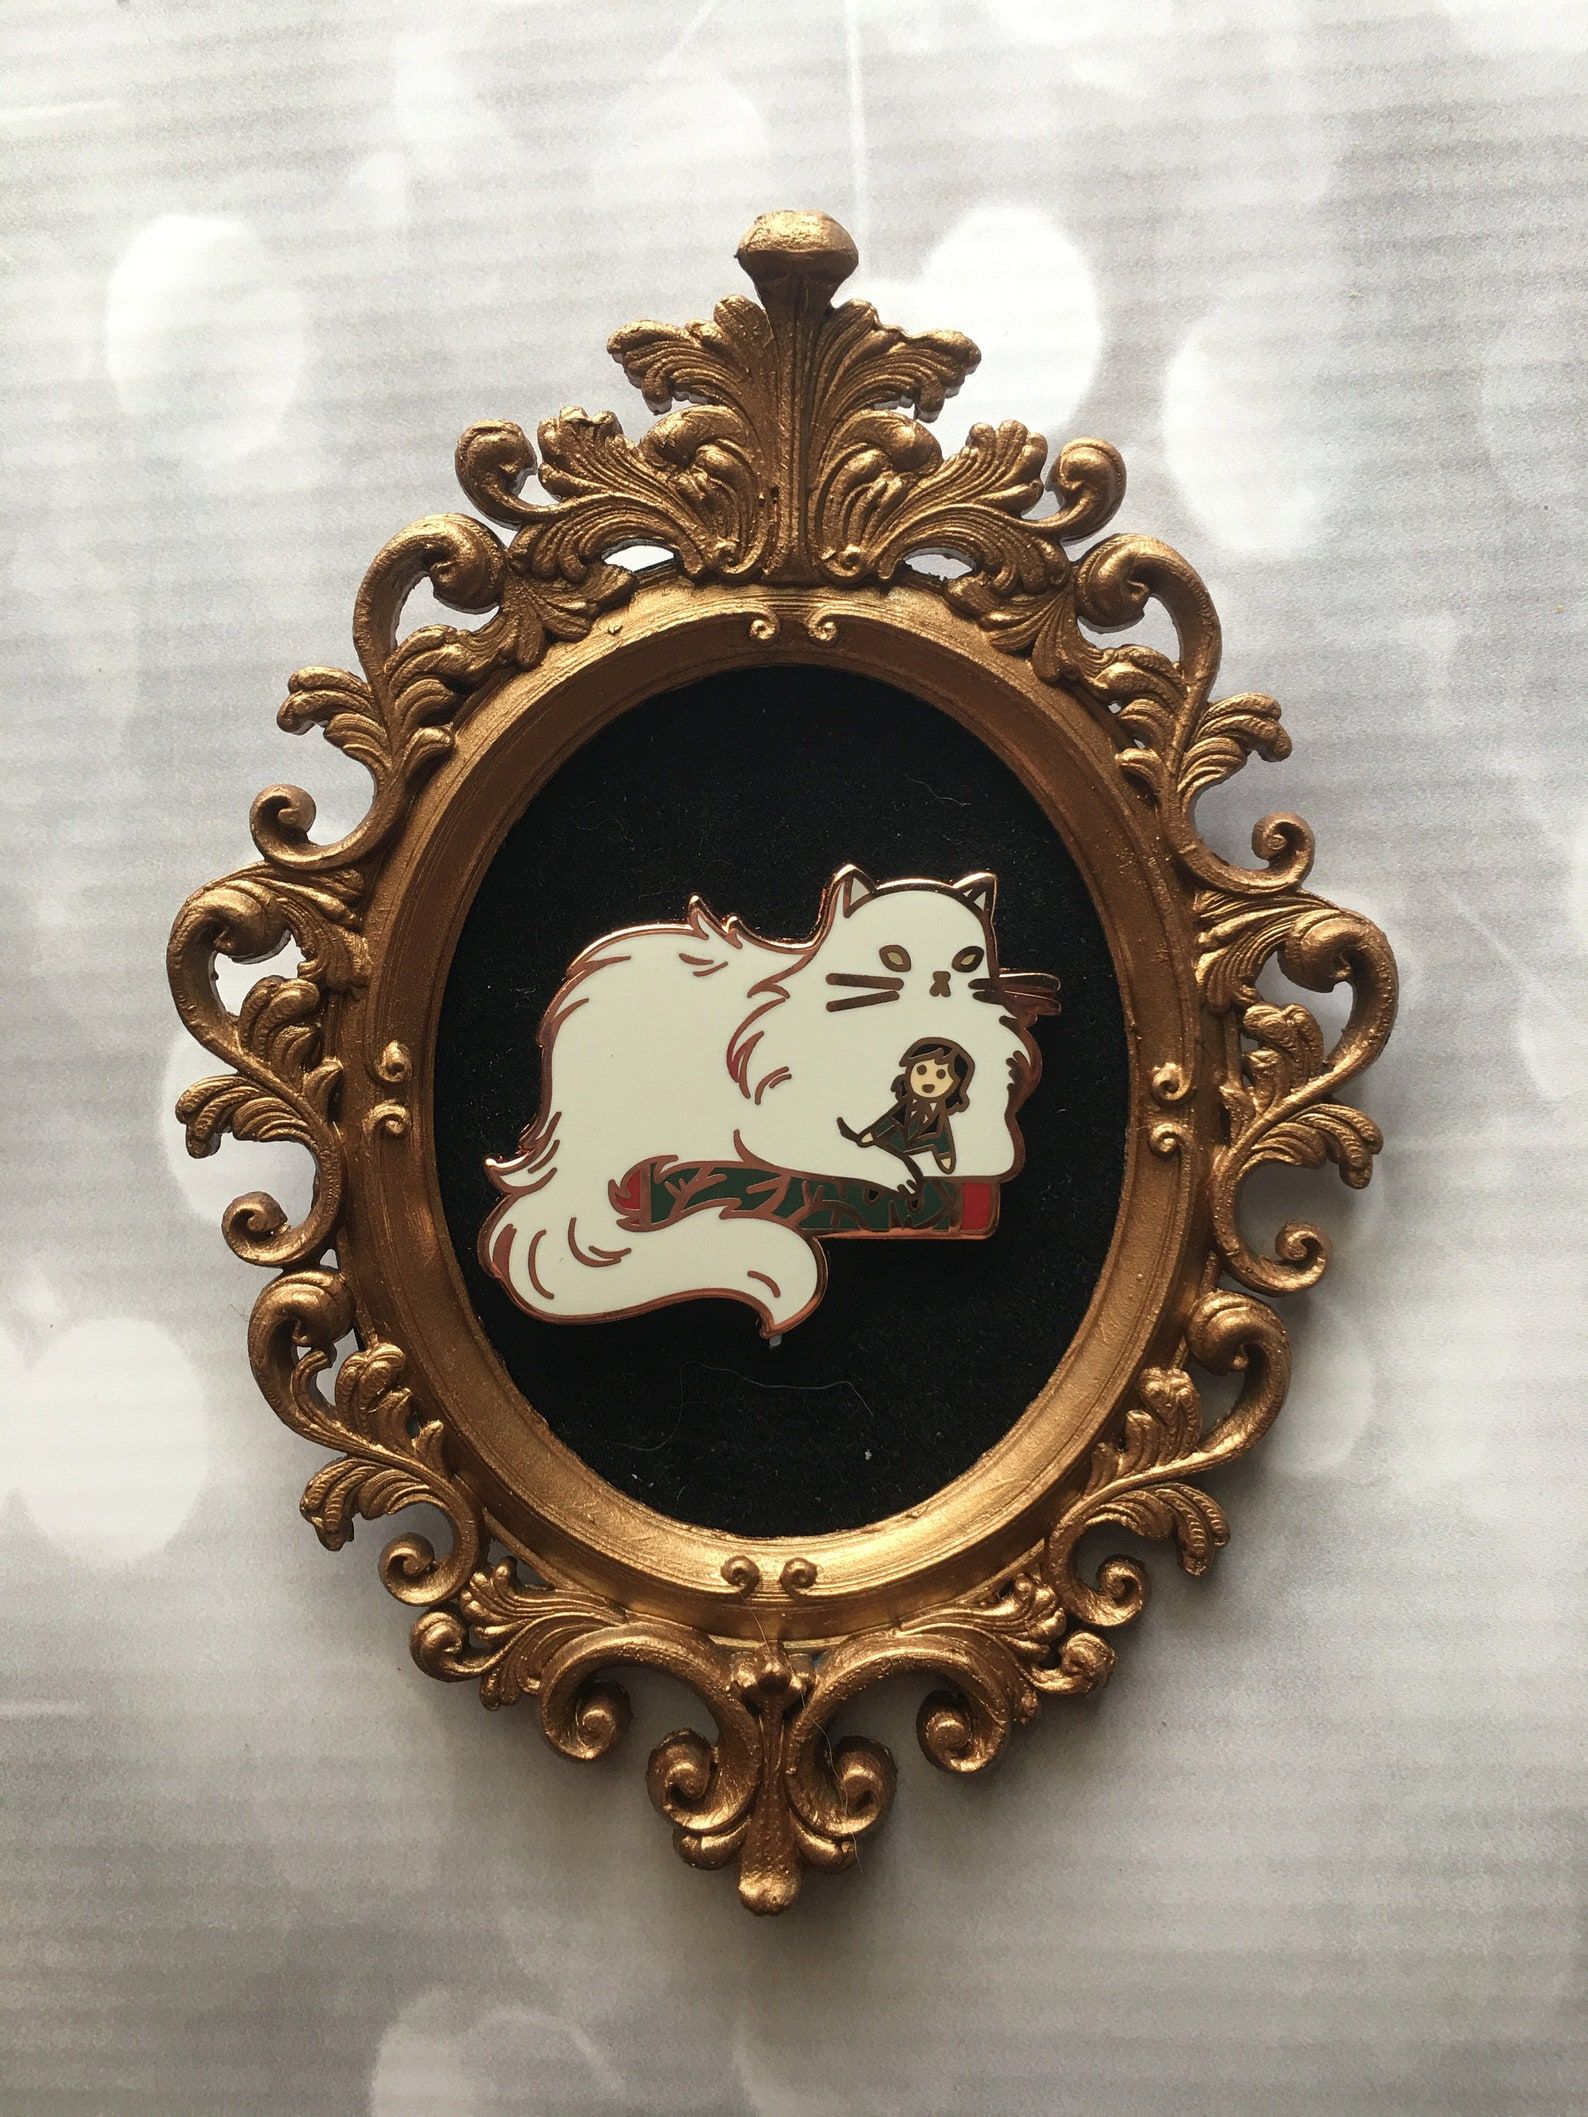 An enamel pin of a fluffy white cat and a small girl